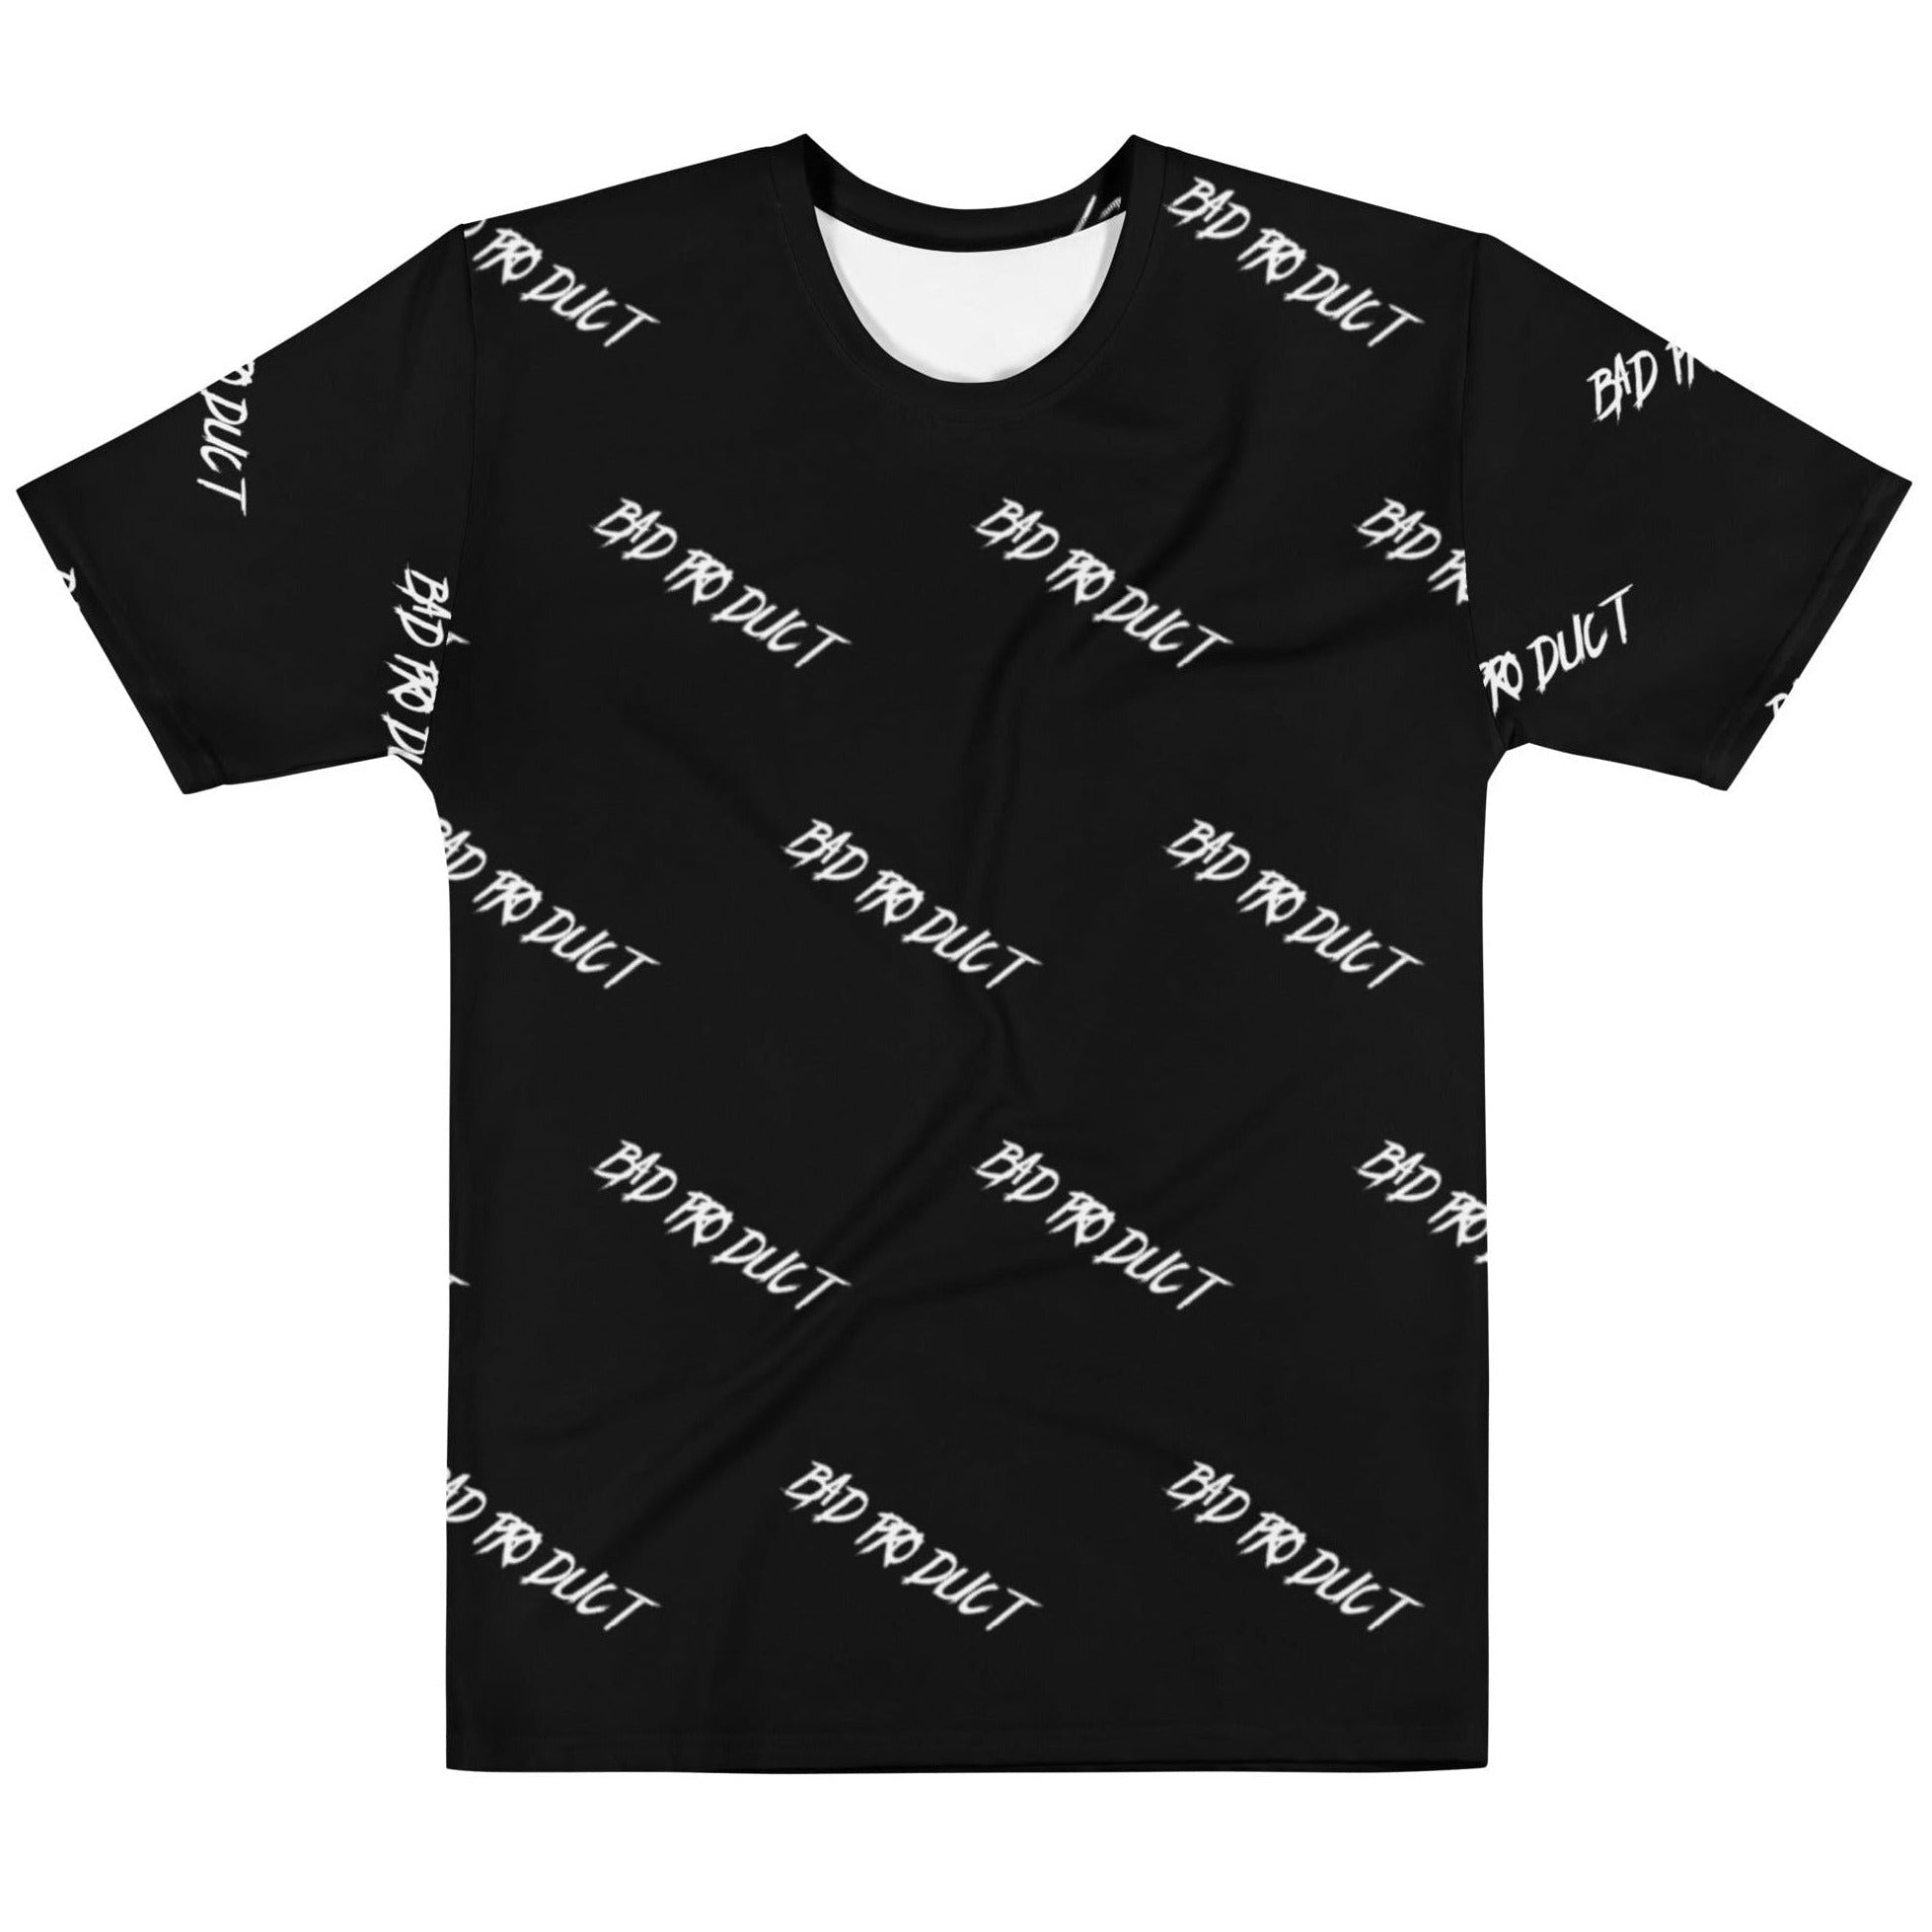 Front view of the 'All Bad Tee' with a white background and black lettering